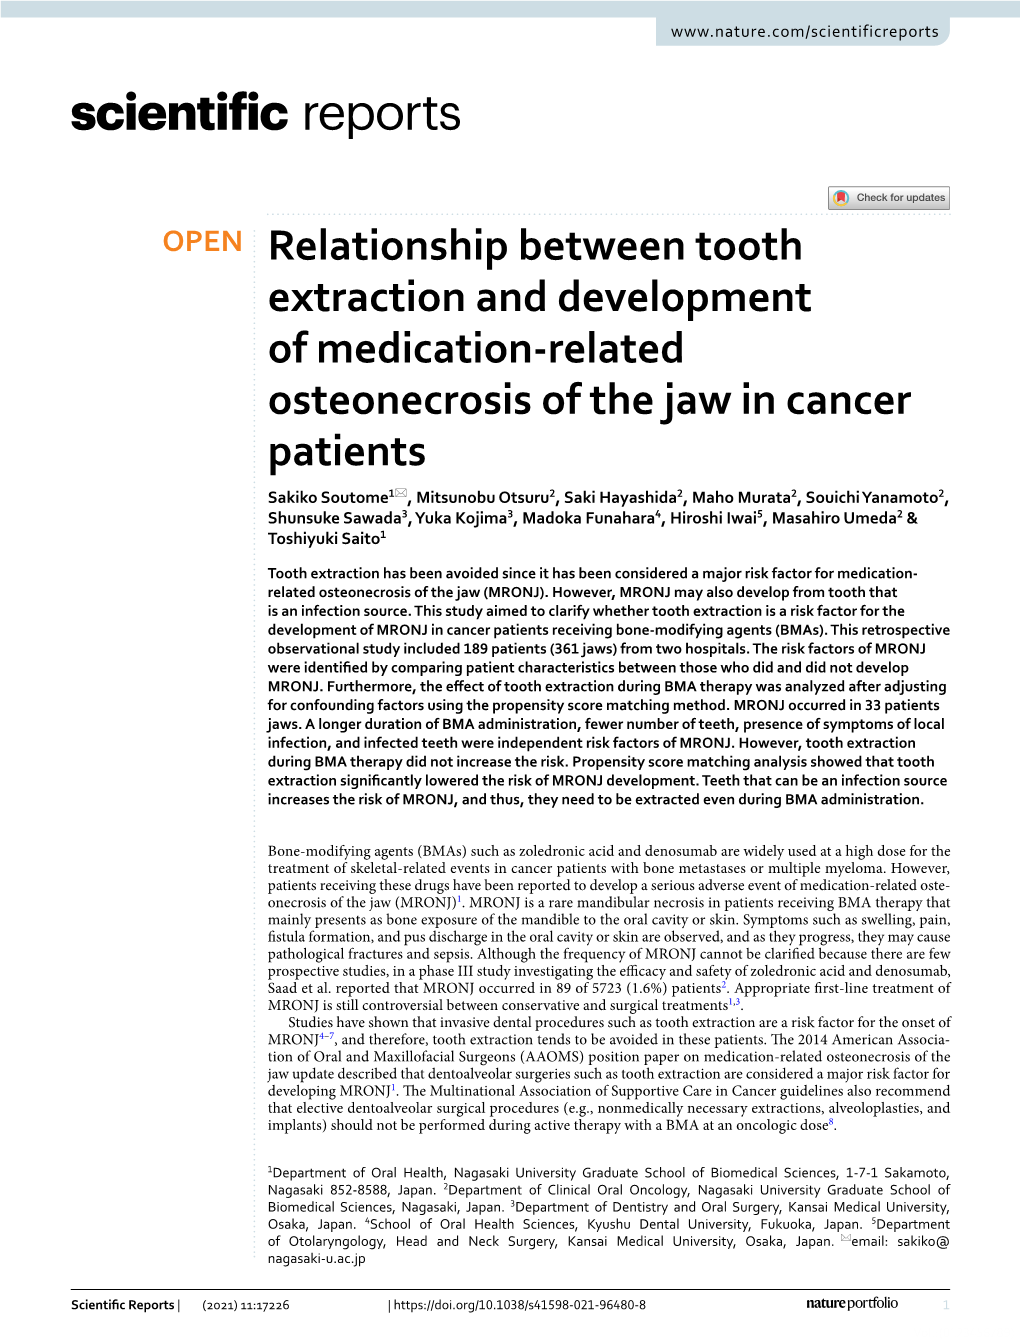 Relationship Between Tooth Extraction and Development of Medication